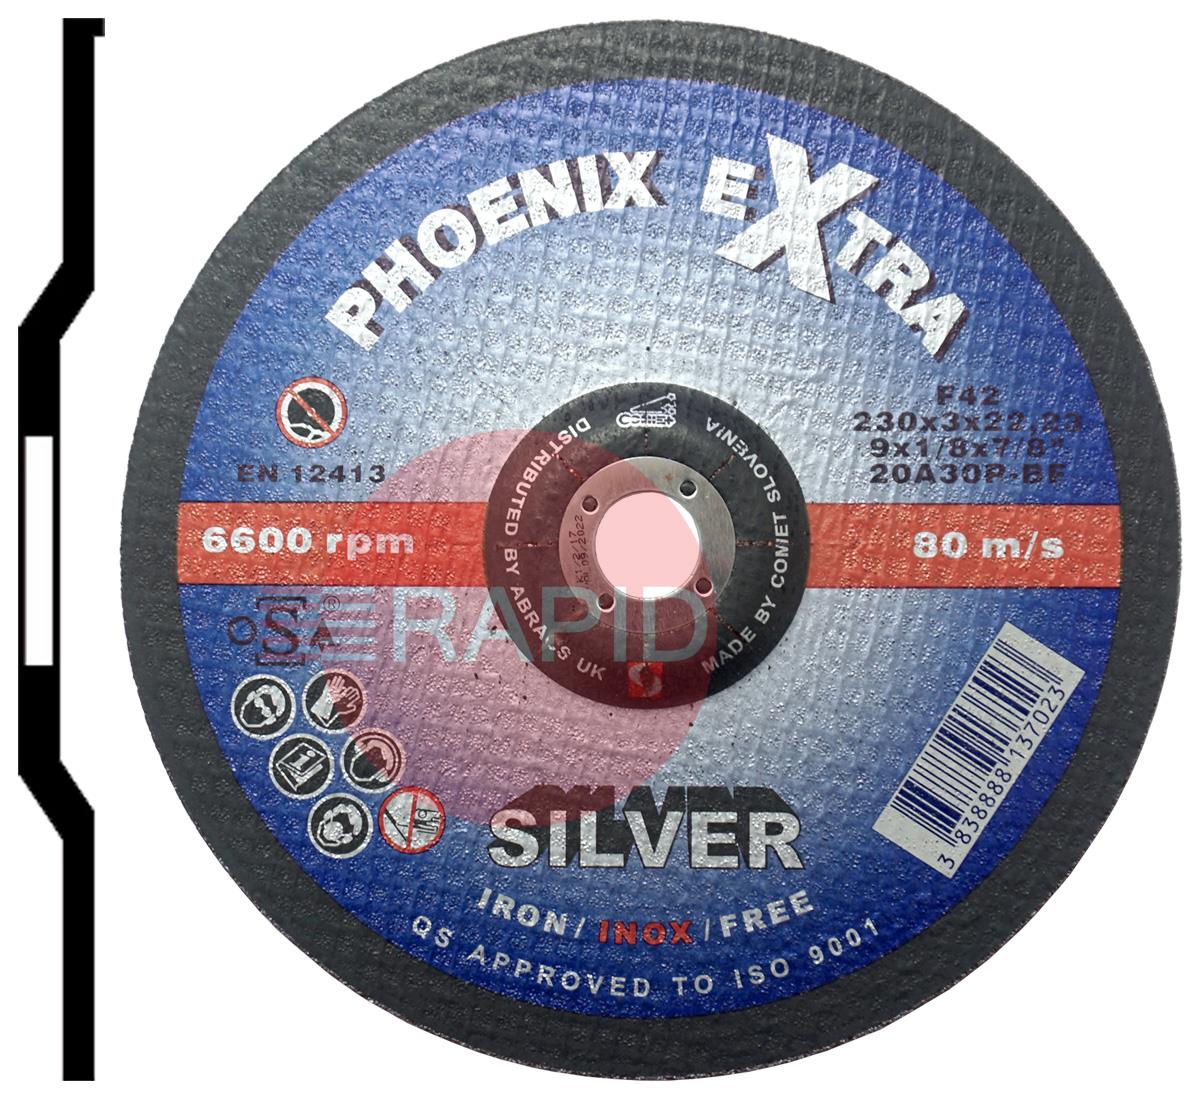 PHS23030DI  Abracs Phoenix Silver 230mm (9) Depressed Centre Cutting Disc 3mm Thick. Grade 20A30P Inox-BF for Steel & Stainless Steel.